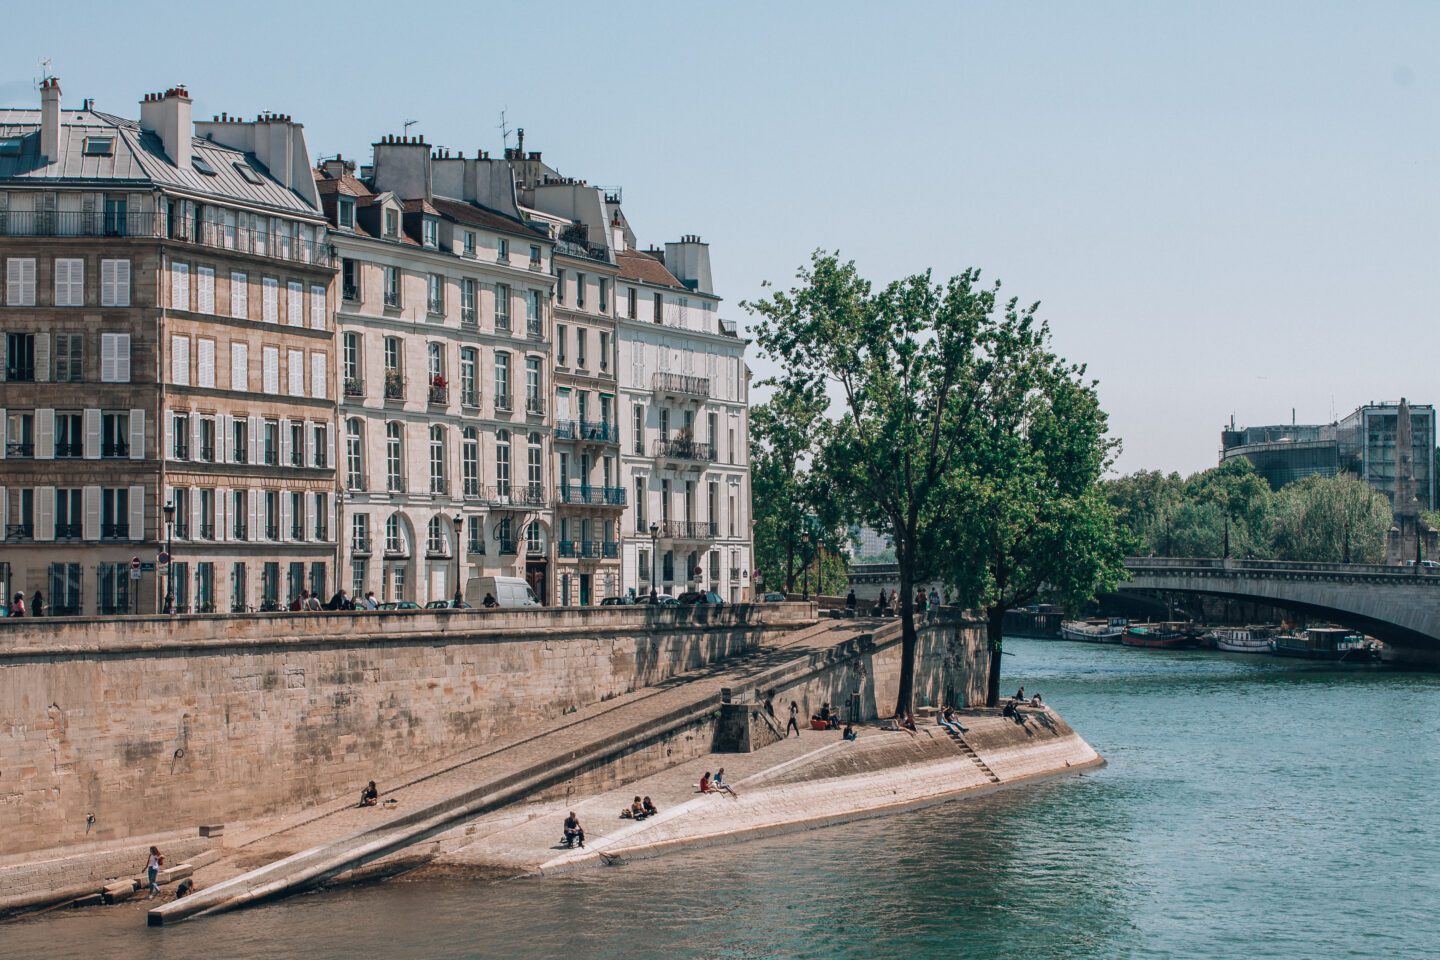 People sit along the Seine river in Paris, France soaking up the summer sunshine with classic Parisian apartment architecture in the background.